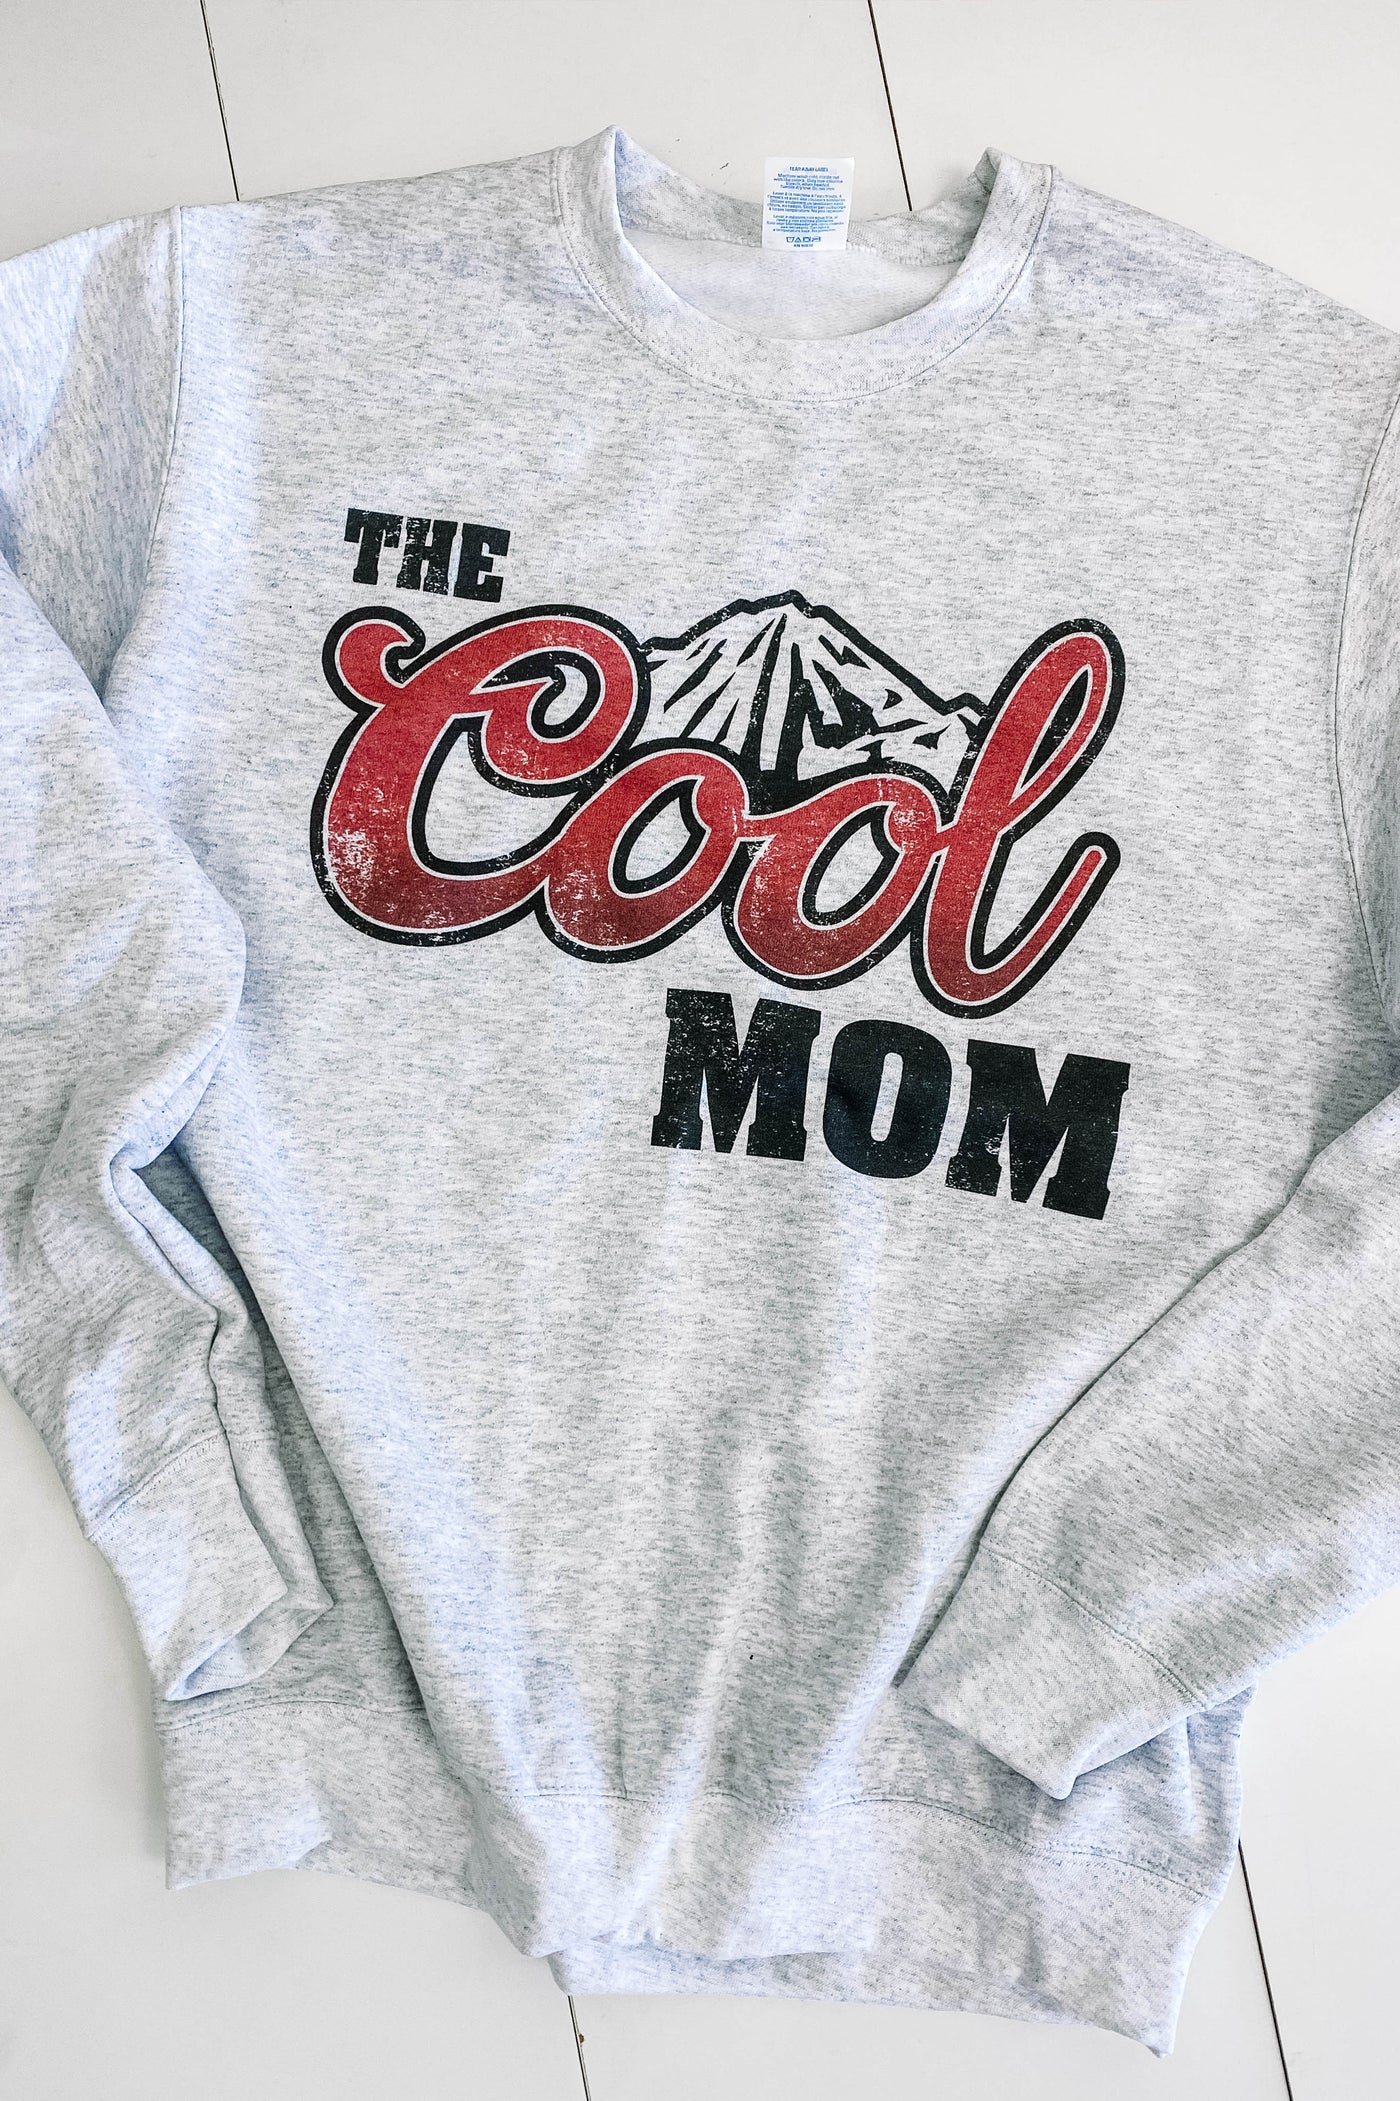 THE COOL MOM